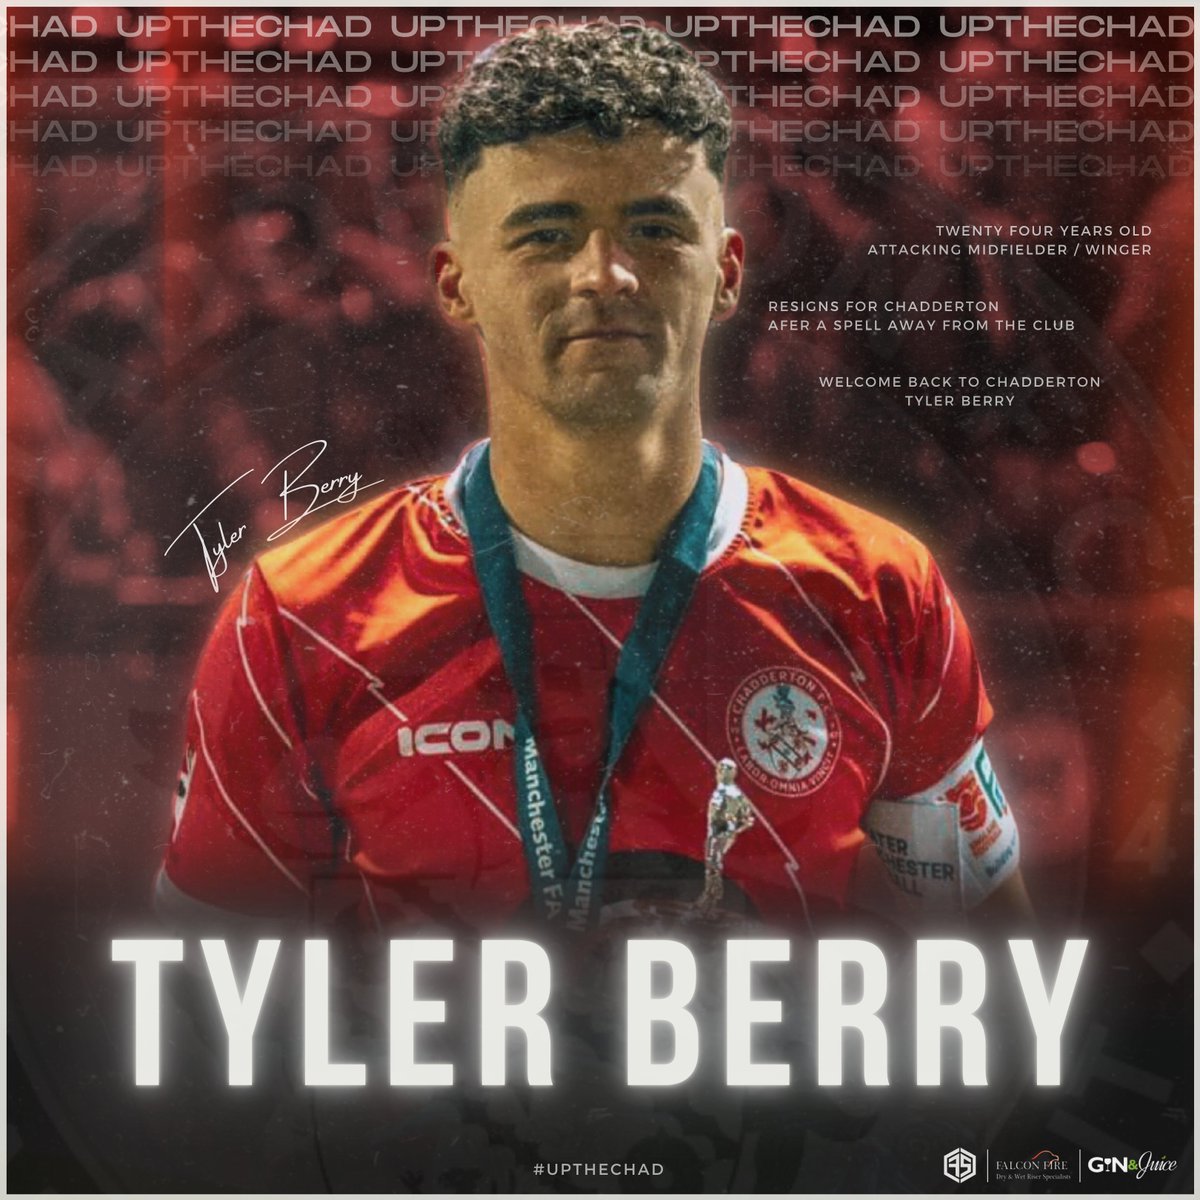 𝐁𝐞𝐫𝐫𝐲 𝐢𝐬 𝐁𝐚𝐜𝐤 🤩 Ahead of tonight's game we are absolutely thrilled to announce the return of Tyler Berry to Chadderton! 🙌 Welcome back to Chadderton Tyler, its great to have you back. ❤️ #UpTheChad🔴⚪️